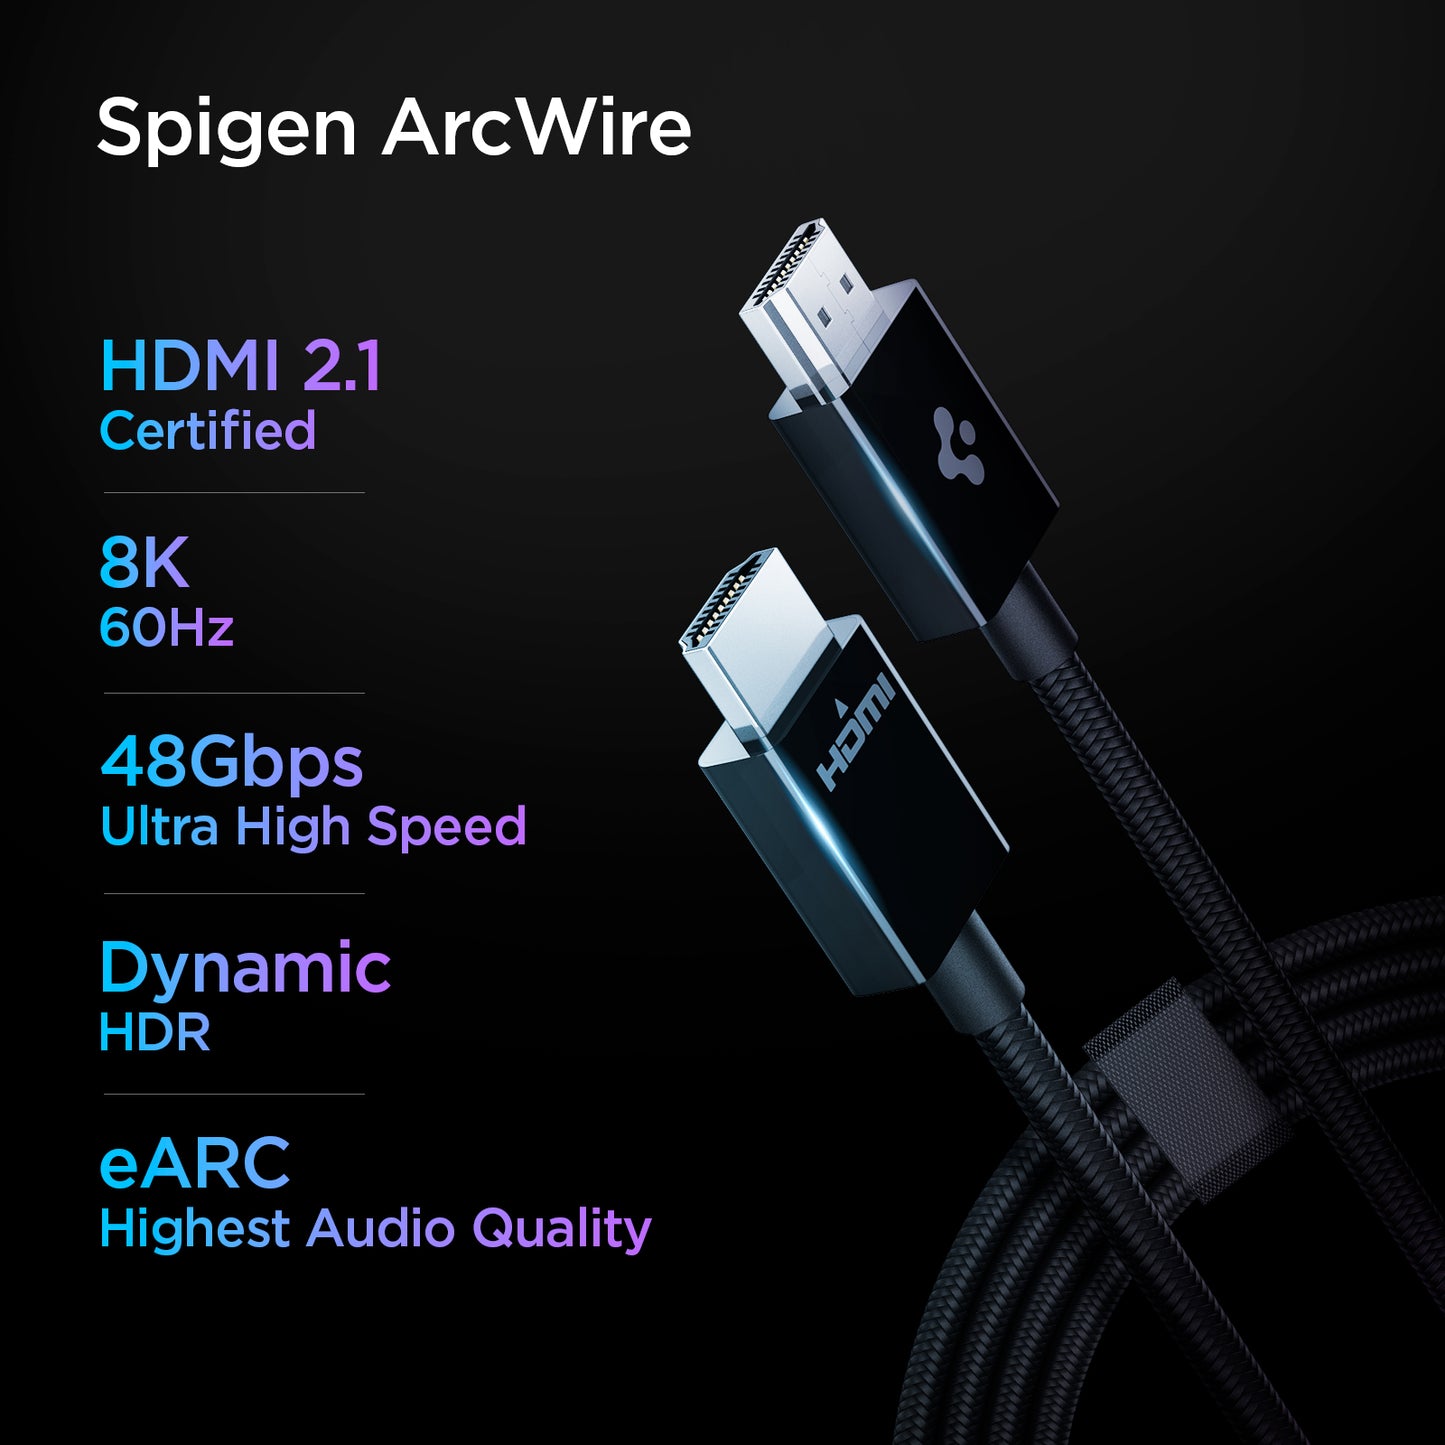 ACA02336 - ArcWire™ HDMI 2.1 Cable PB2001 in Black showing the Spigen ArcWire. HDMI 2.1 Certified, 8K (60Hz), 48Gbpd Ultra High Speed, Dynamic HDR, eARC Highest Audio Quality